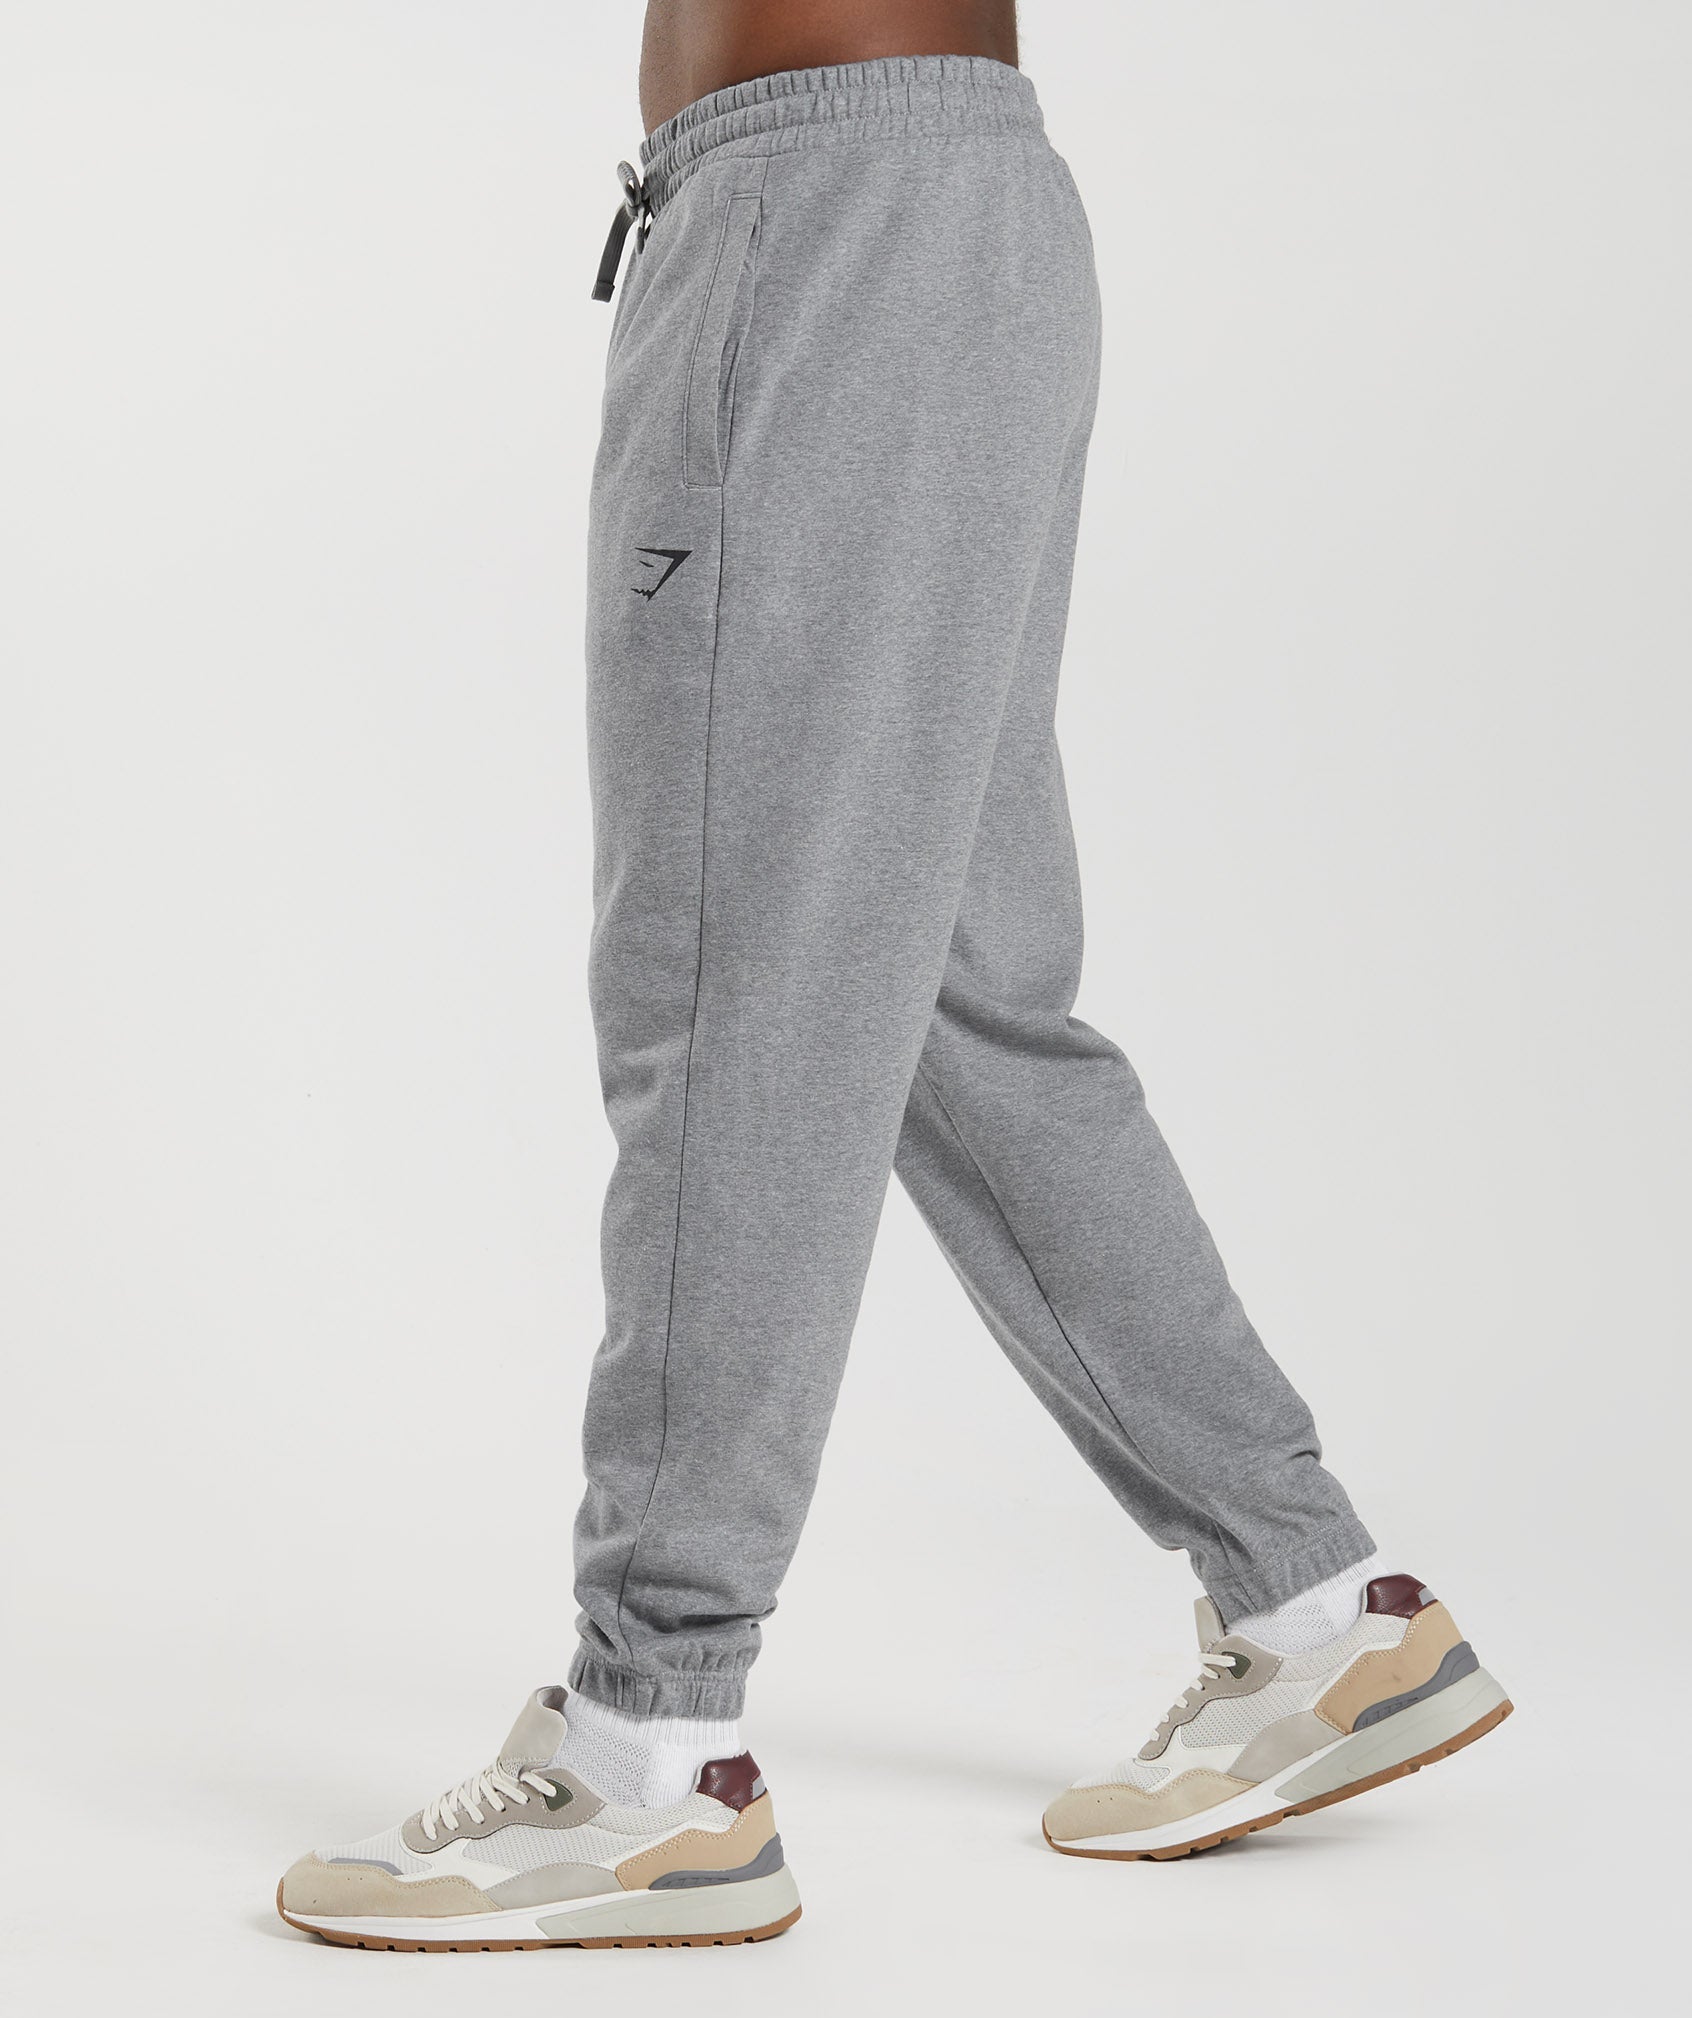 Essential Oversized Joggers in Charcoal Grey Marl